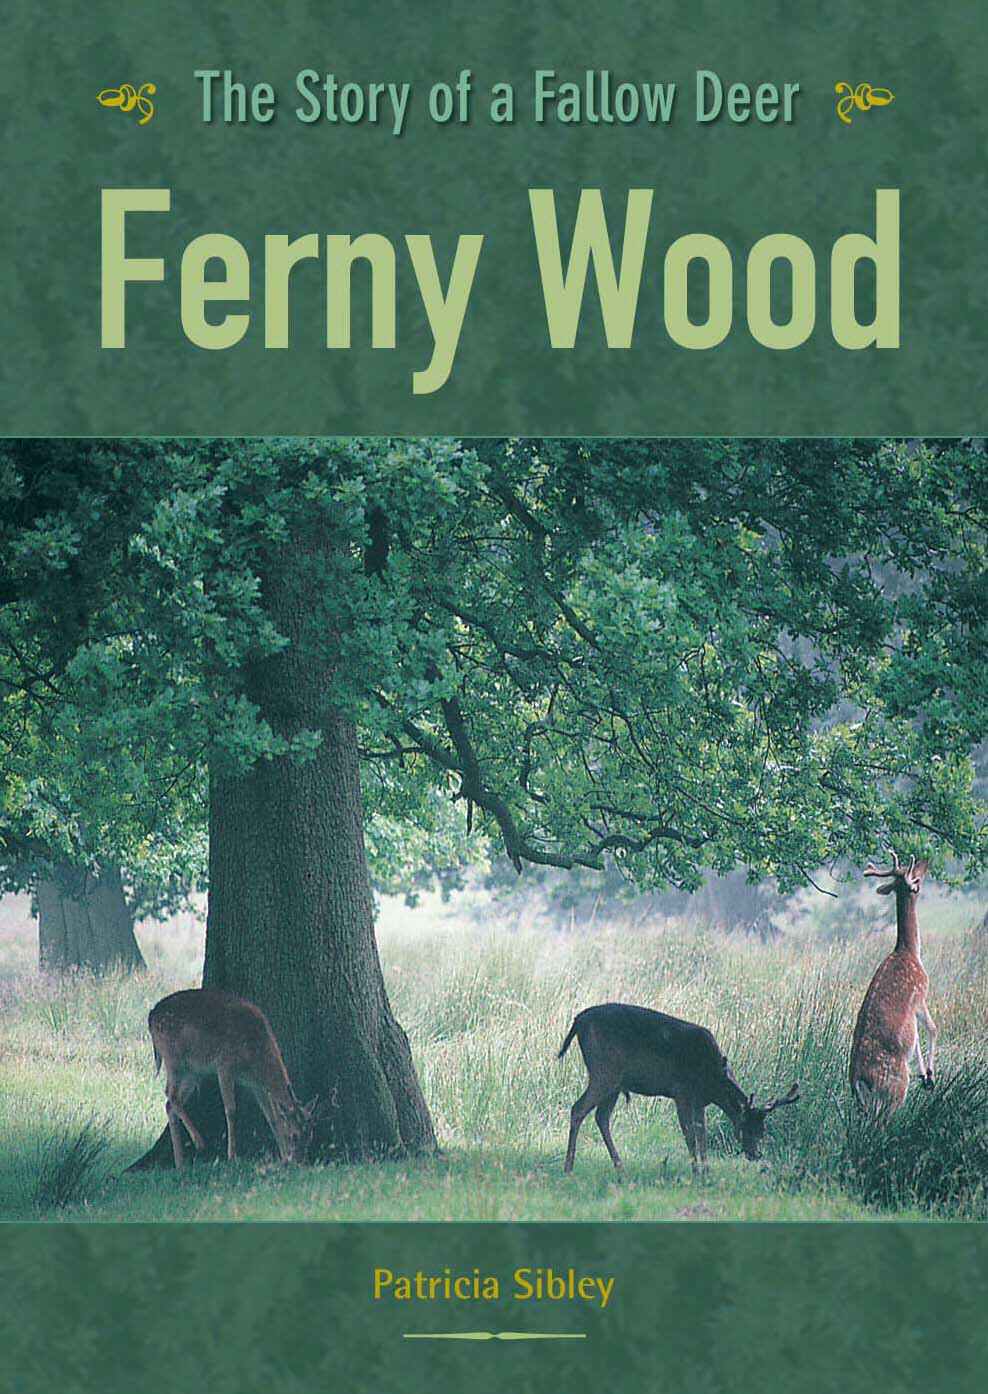 Ferny Wood, The Story of a Fallow Deer, Patricia Sibley